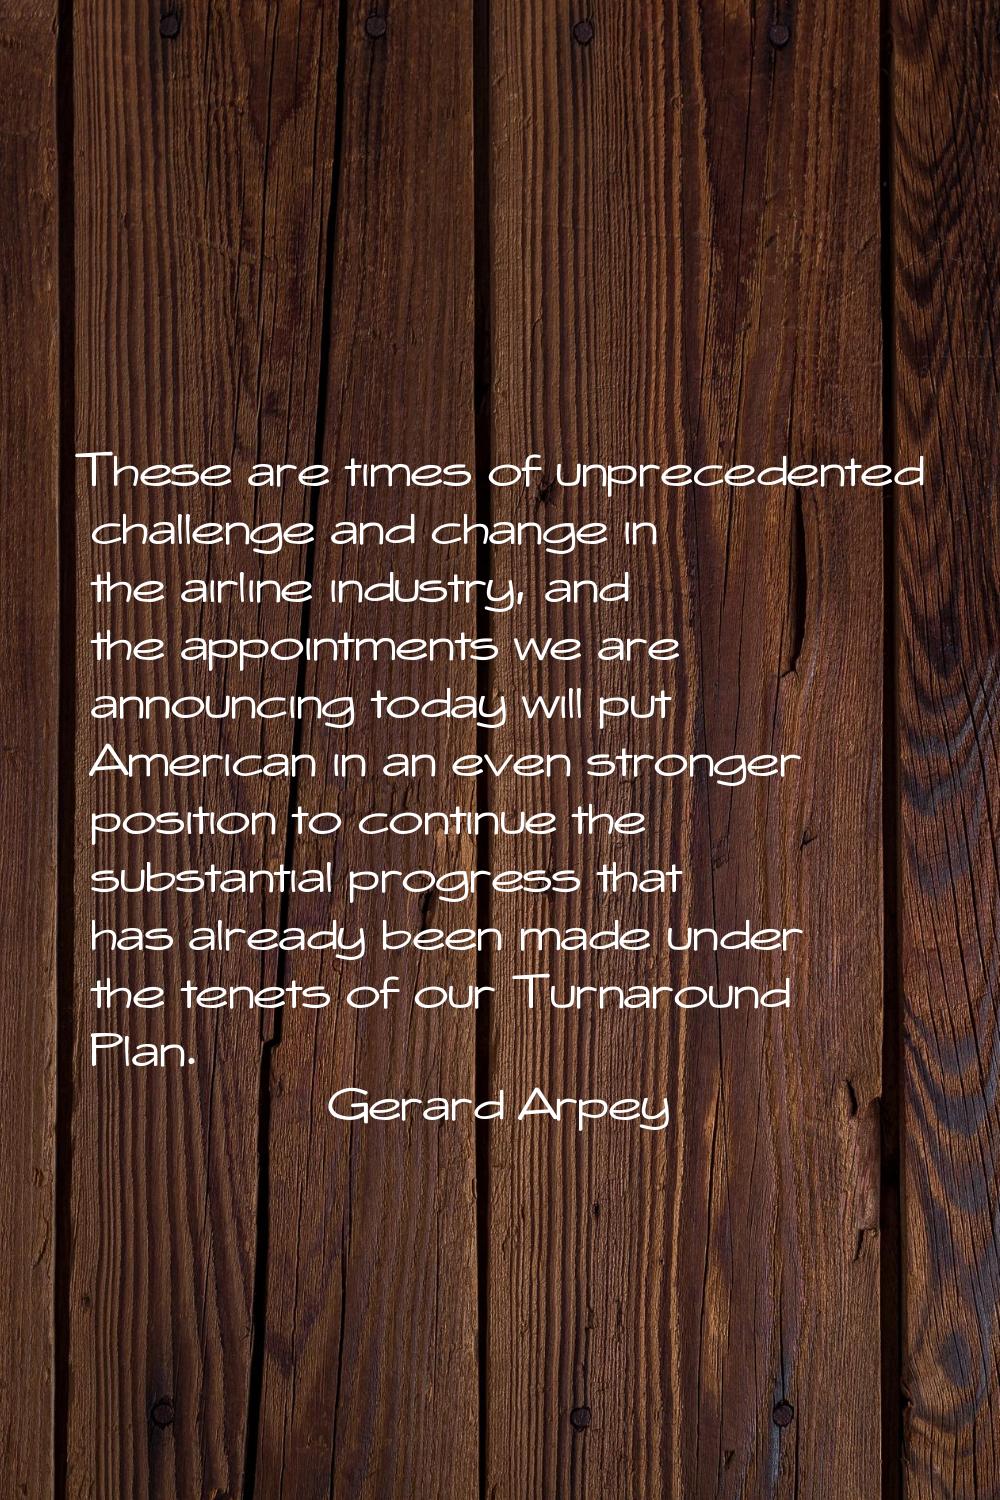 These are times of unprecedented challenge and change in the airline industry, and the appointments